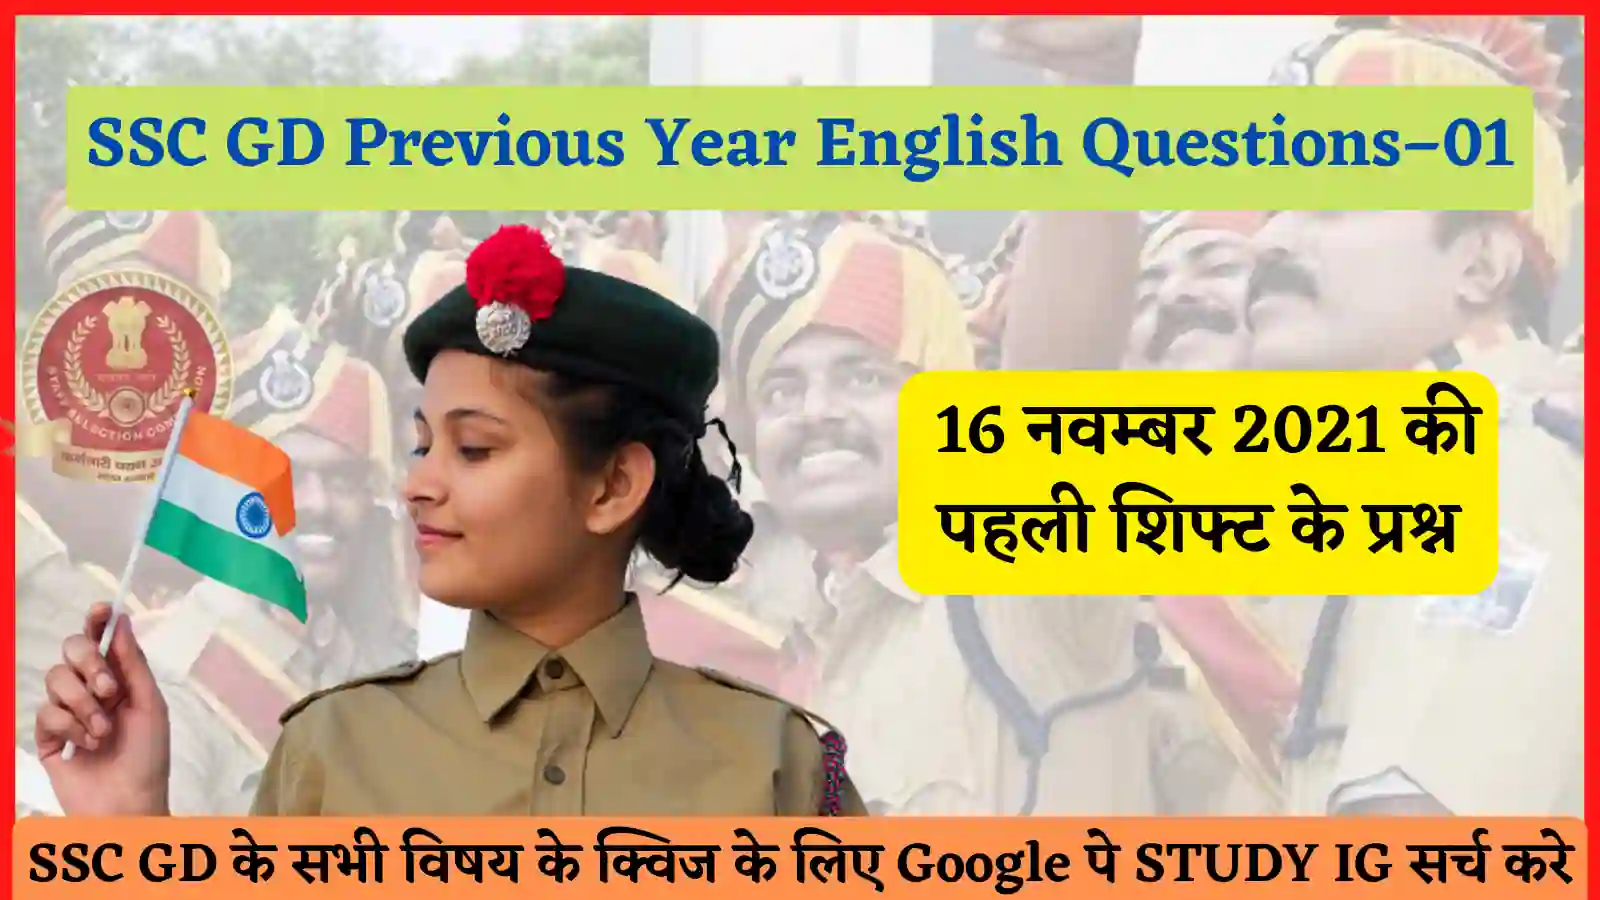 SSC GD Previous Year English Questions/Quiz – 01